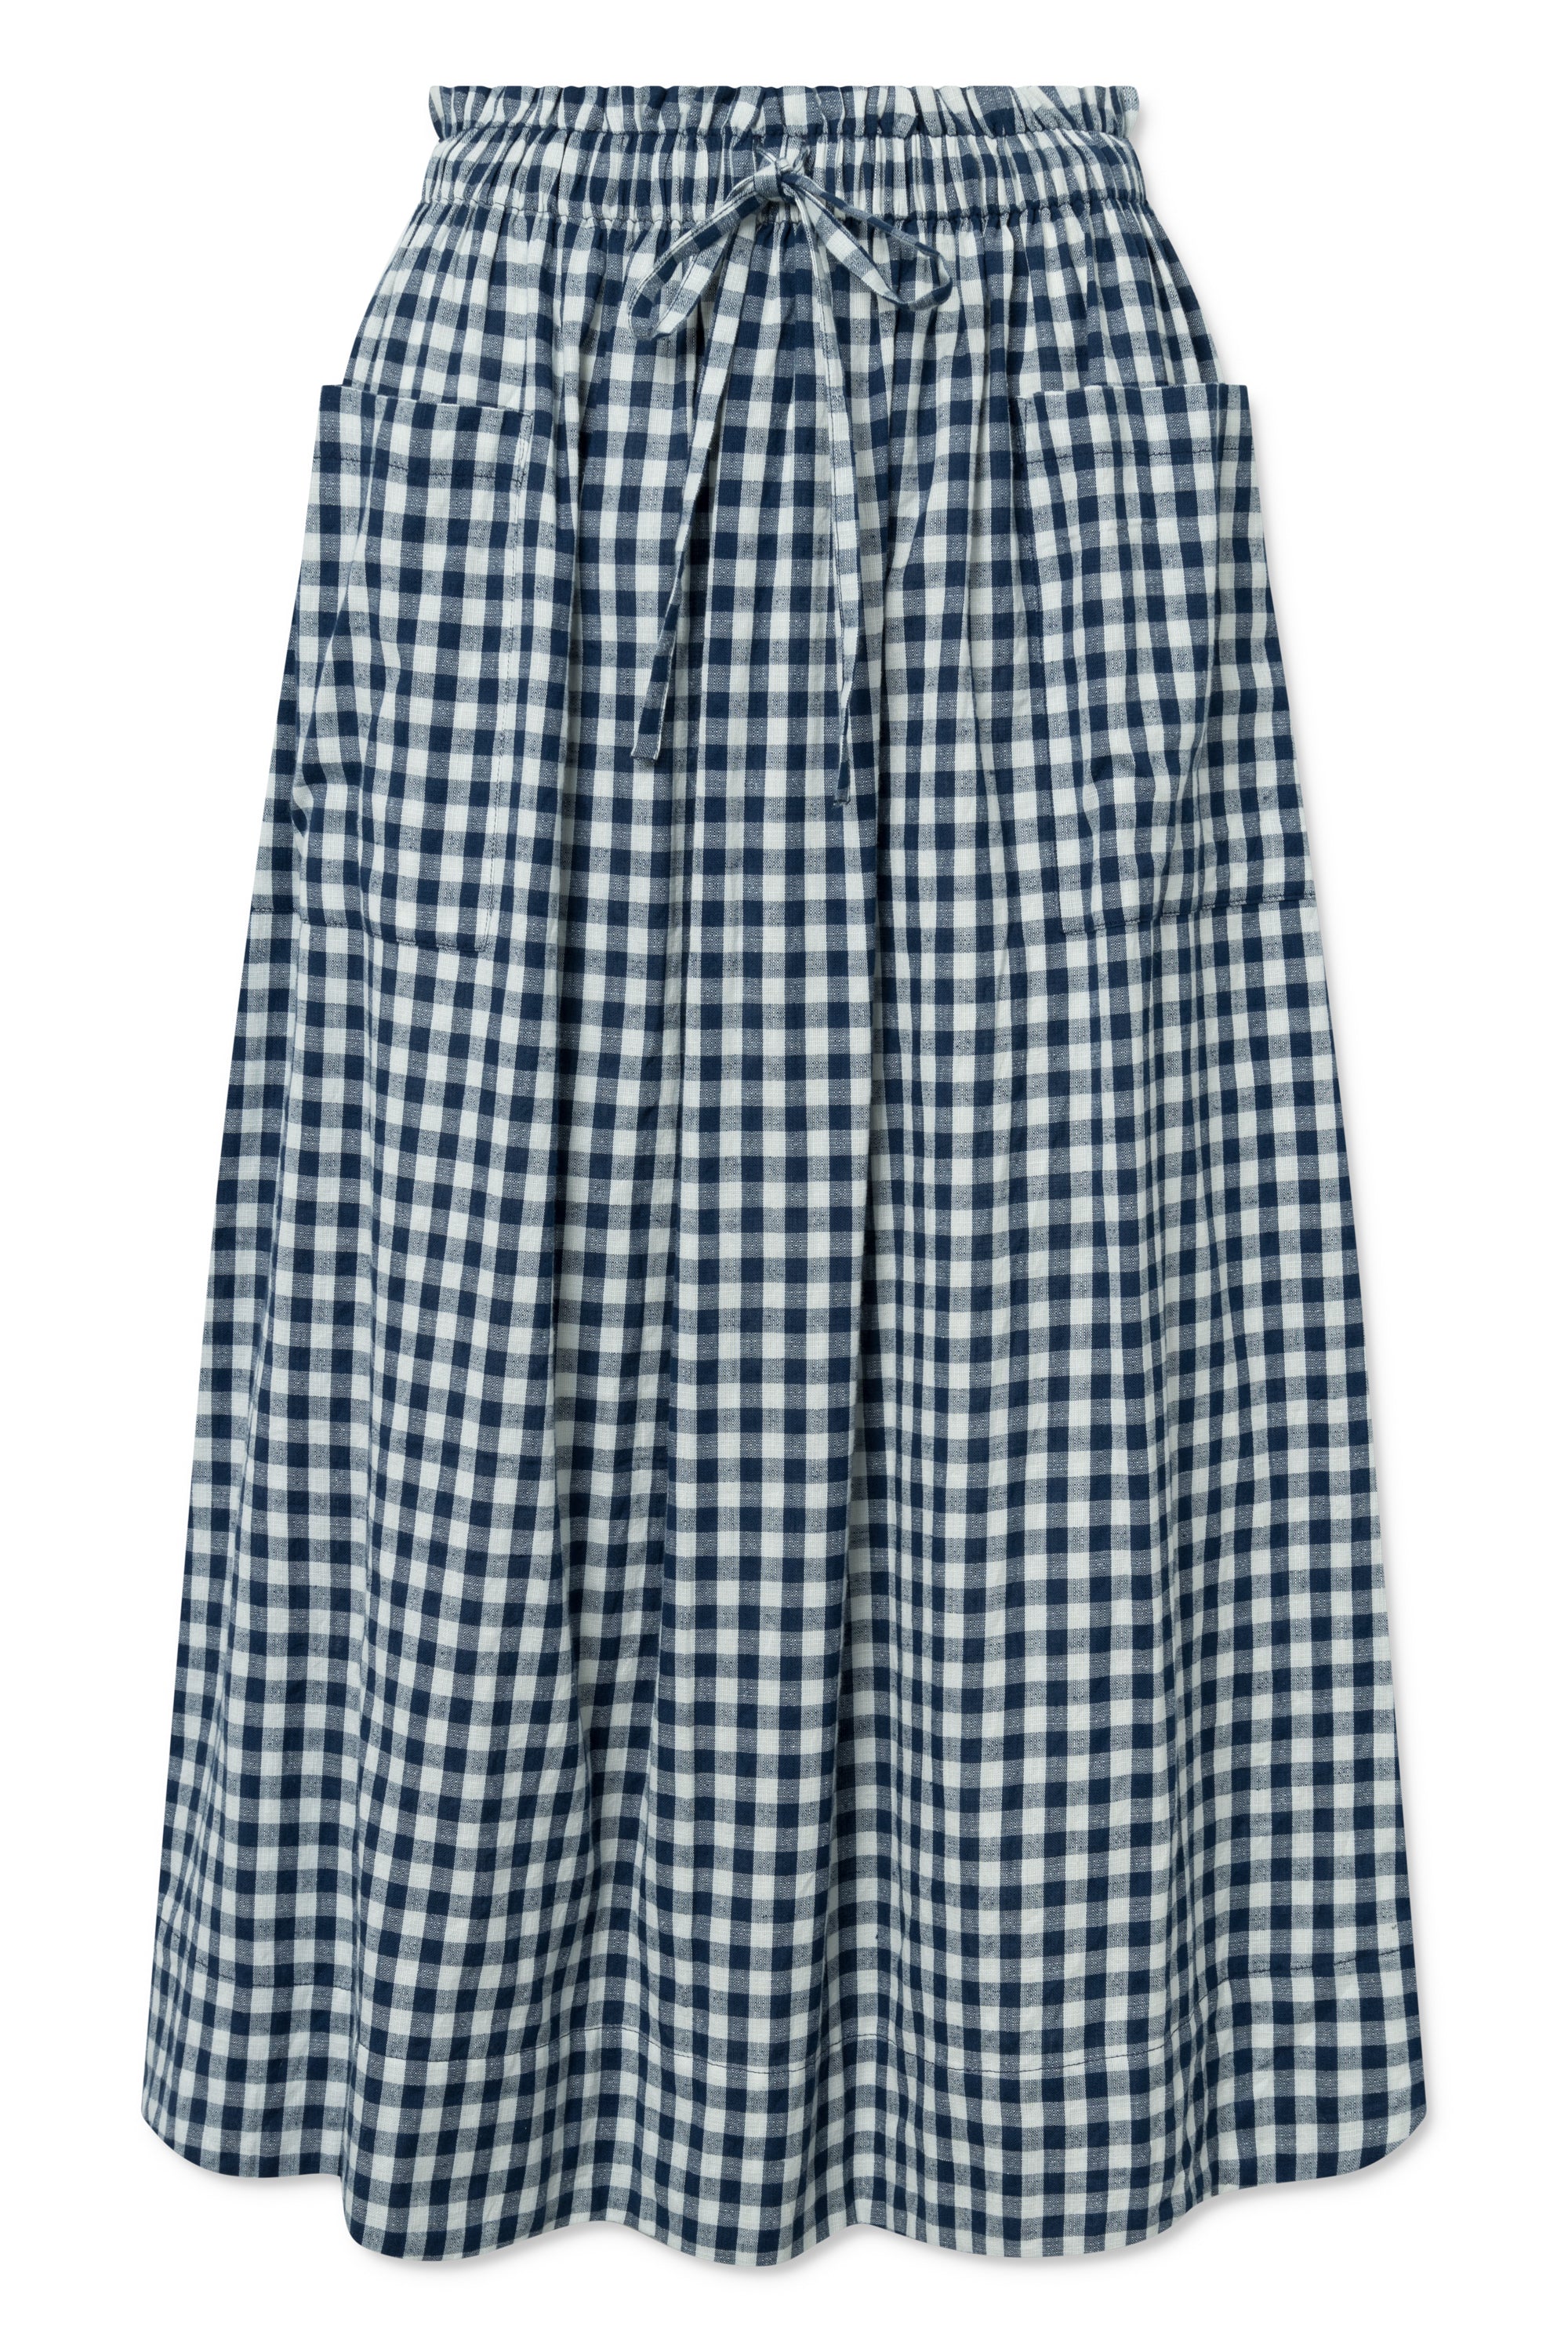 nué notes August Skirt SHORTS & SKIRTS 422 Blue Check